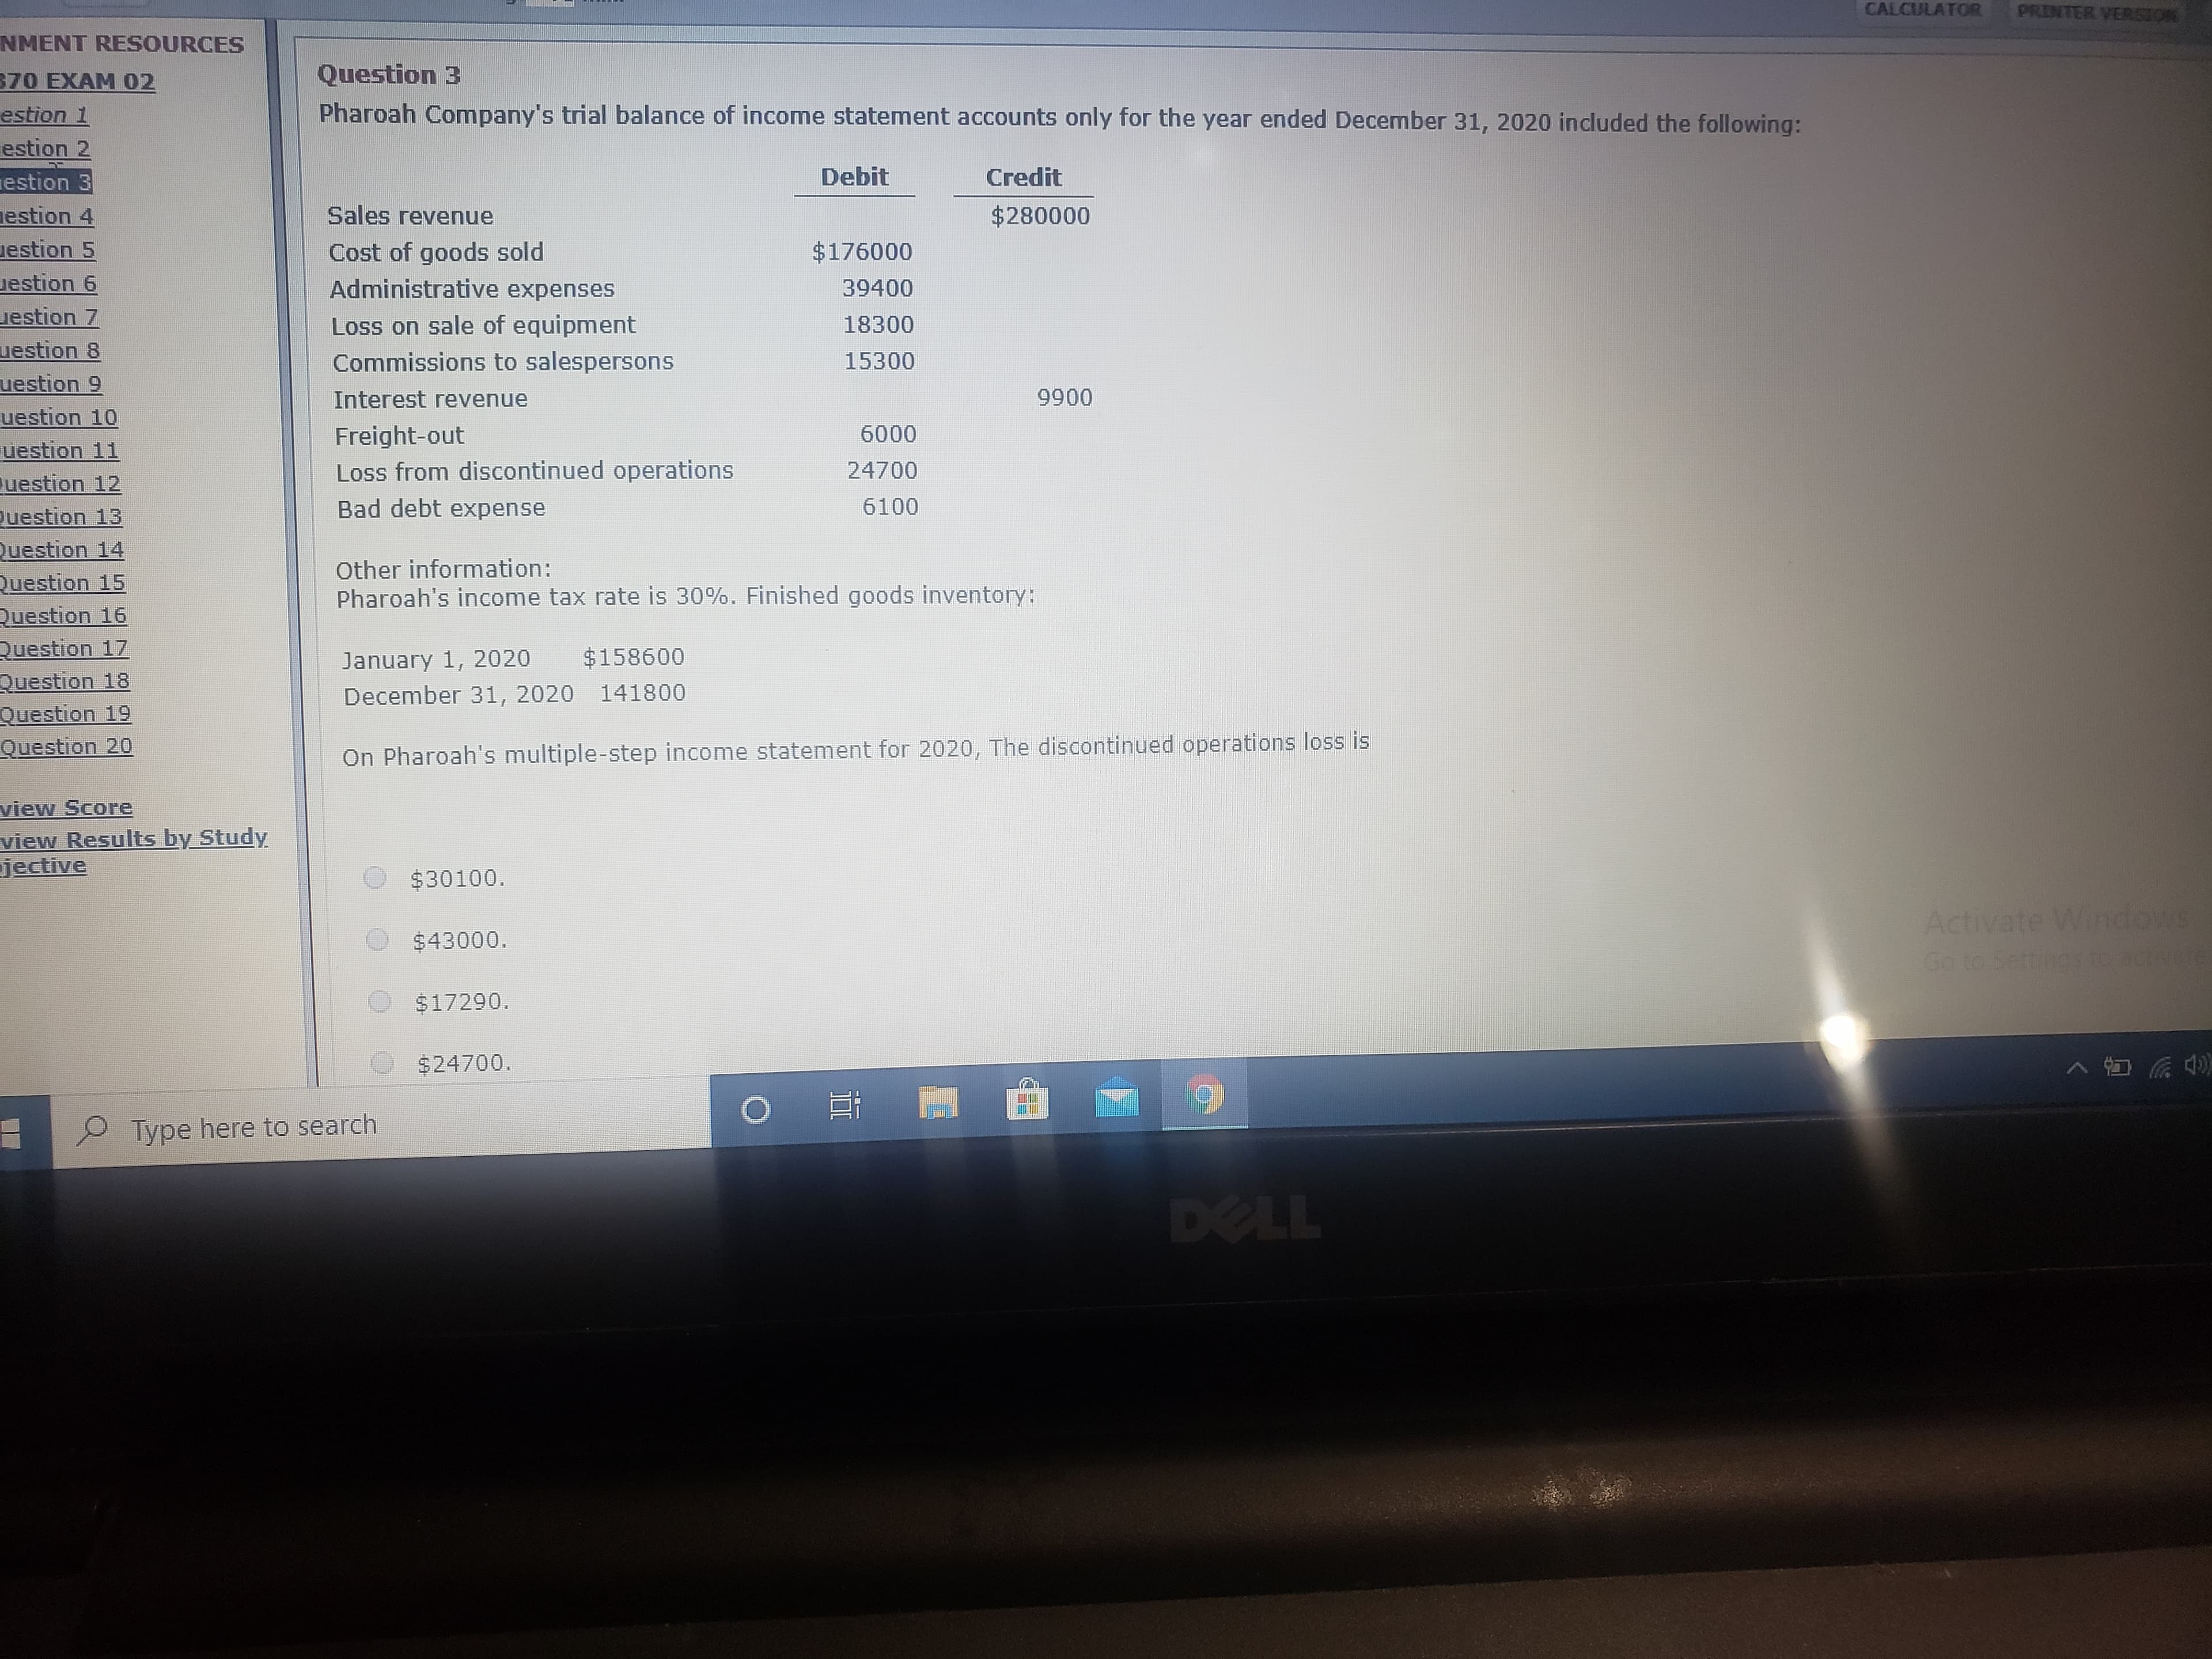 CALCULATOR
PRINTER VERSION
NMENT RESOURCES
370 EXAM 02
Question 3
estion 1
Pharoah Company's trial balance of income statement accounts only for the year ended December 31, 2020 included the following:
estion 2
estion 3
nestion 4
Debit
Credit
Sales revenue
$280000
uestion 5
uestion 6
estion 7
uestion 8
Cost of goods sold
$176000
Administrative expenses
39400
Loss on sale of equipment
Commissions to salespersons
18300
15300
uestion 9
uestion 10
uestion 11
Interest revenue
0066
Freight-out
6000
Loss from discontinued operations
24700
uestion 12
Duestion 13
Question 14
Question 15
Question 16
Question 17
Question 18
Question 19
Question 20
Bad debt expense
6100
Other information:
Pharoah's income tax rate is 30%. Finished goods inventory:
January 1, 2020
$158600
December 31, 2020 141800
On Pharoah's multiple-step income statement for 2020, The discontinued operations loss is
view Score
view Results by Study
jective
$30100.
Windows
Activate
Go to Settigs to activete
$43000.
$17290.
$24700.
Type here to search
DELL
